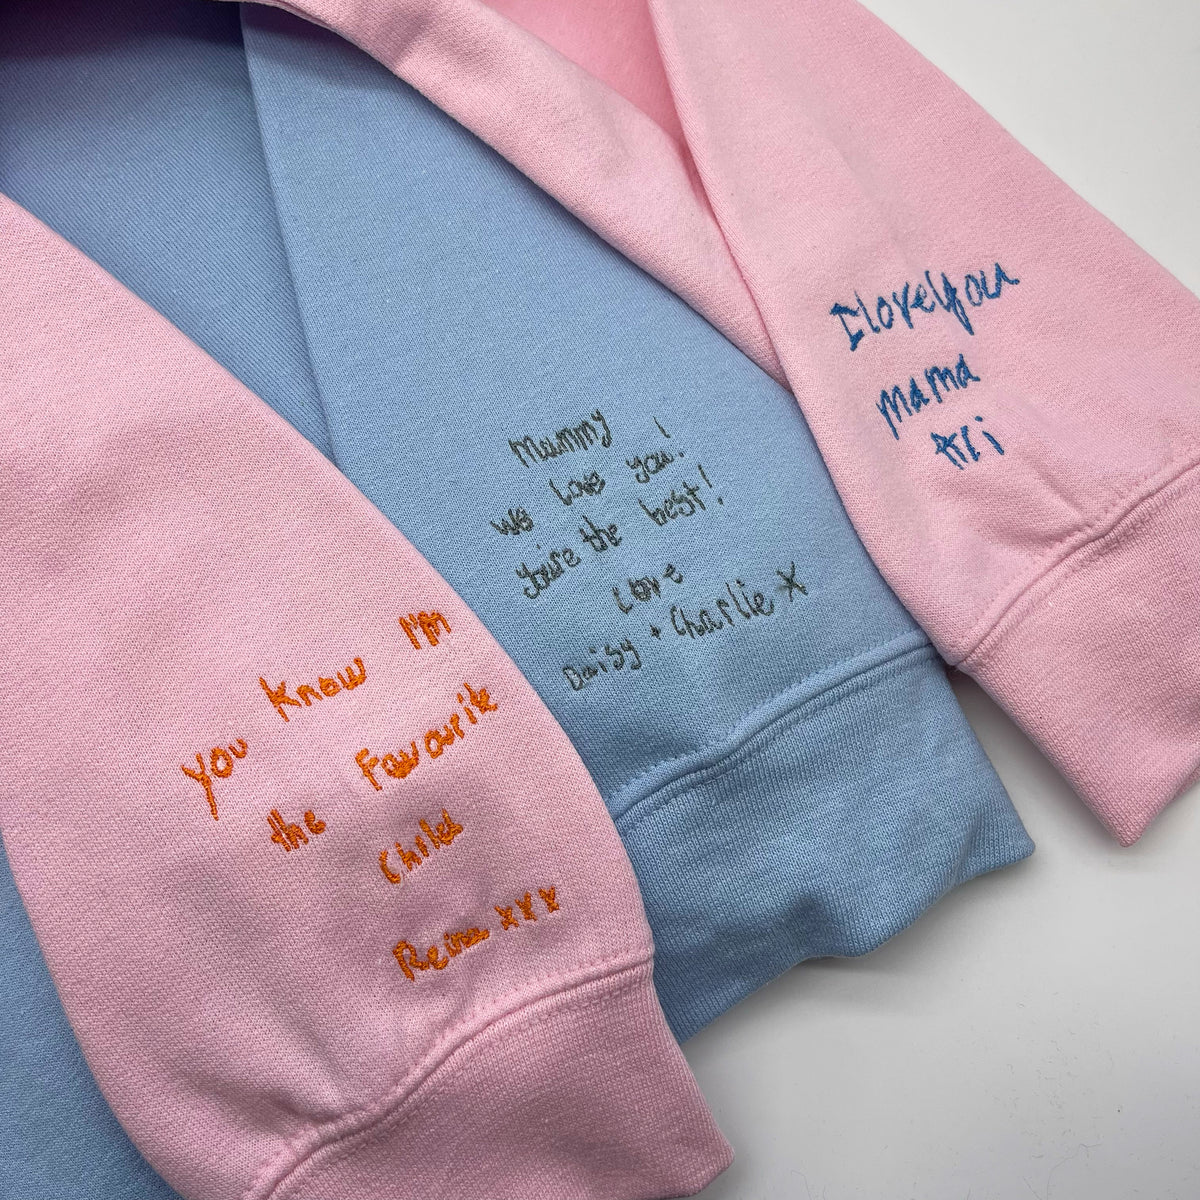 Personalised Embroidered Handwriting Sweatshirt. Anniversary gifts for her, anniversary gifts for him and personalised embroidered sweatshirts.